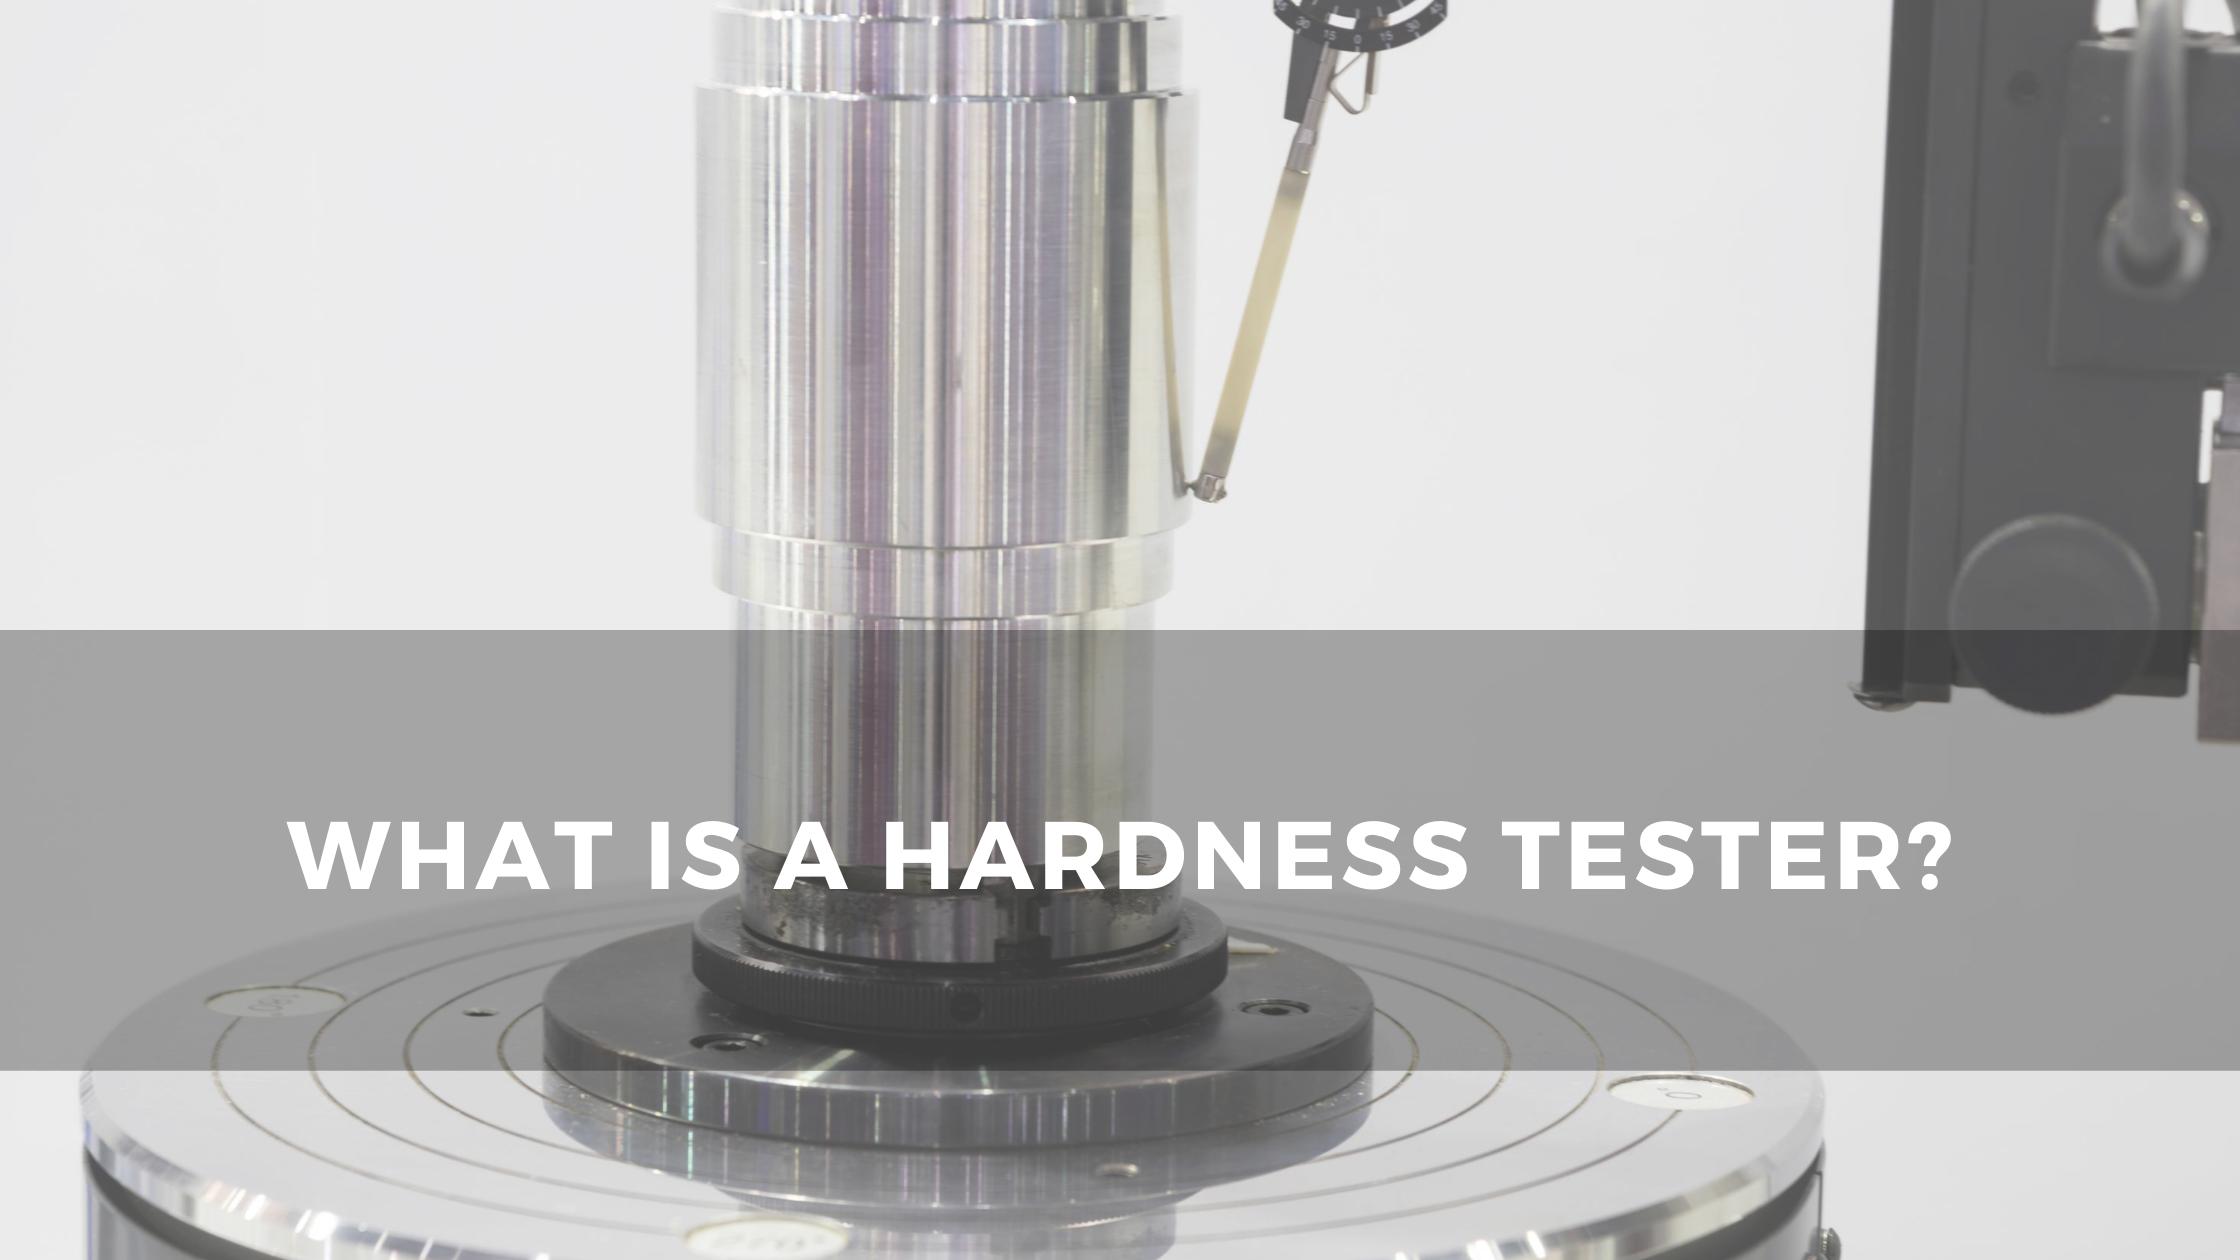 What is a hardness tester?